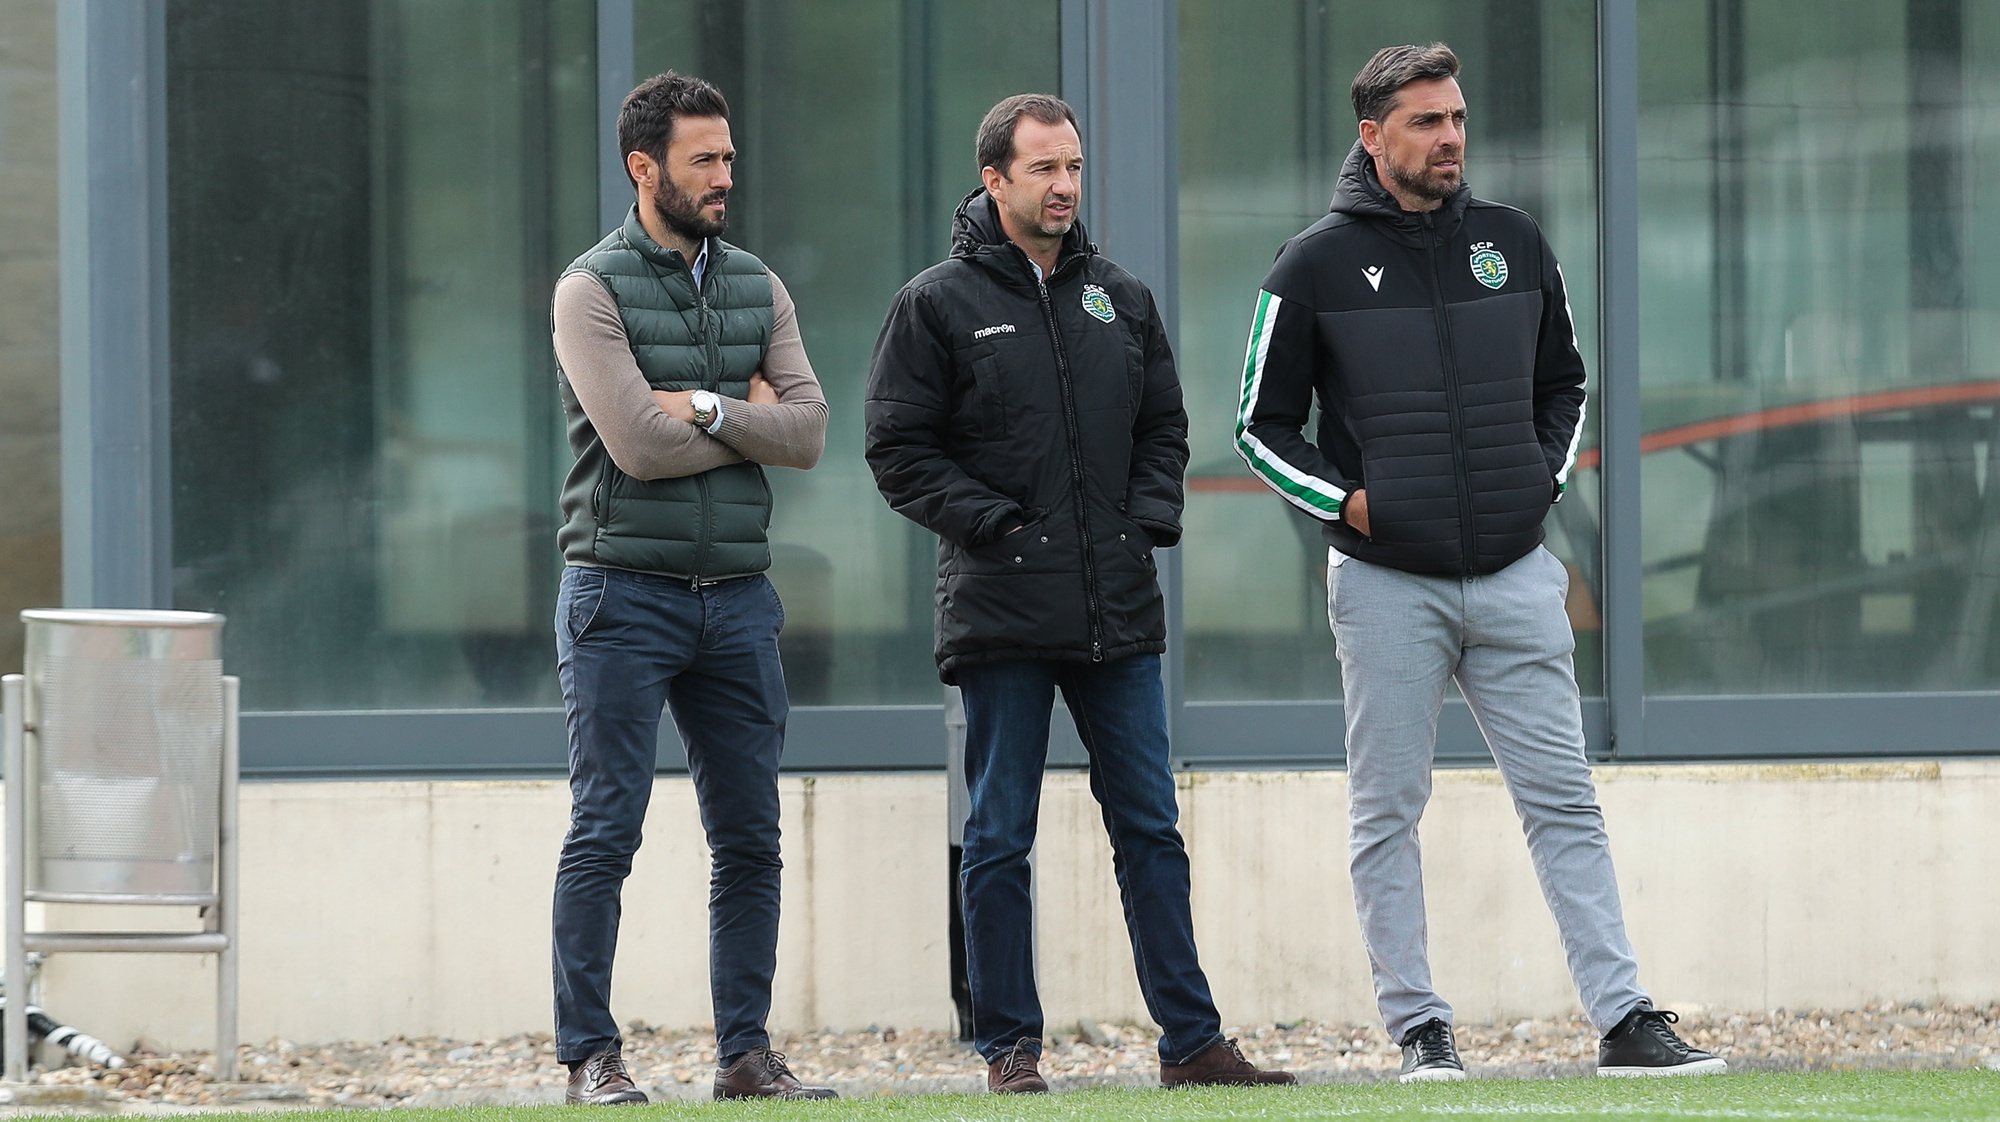 Sporting&#039;s President Frederico Varandas (C) speaks with Hugo Viana (L) and Beto Severo (R) during a training session at the team&#039;s sport complex in Alcochete, Portugal, 23 October 2019. Sporting prepares its upcoming UEFA Europa League&#039;s Group D soccer match against Rosenborg on 24 October. MIGUEL A. LOPES/LUSA